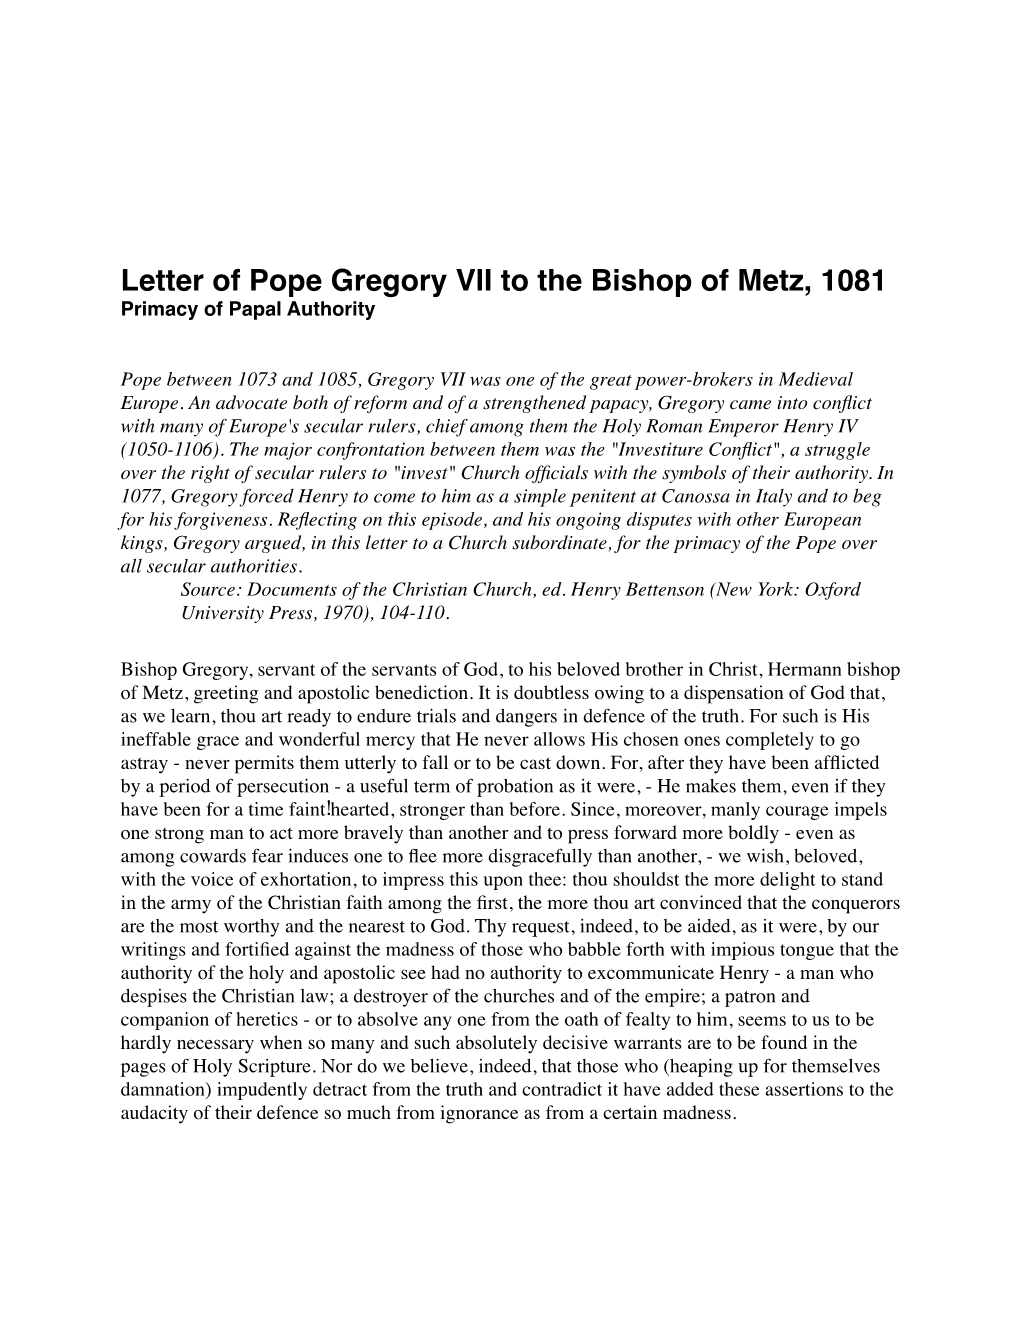 Letter of Pope Gregory VII to the Bishop of Metz, 1081 Primacy of Papal Authority